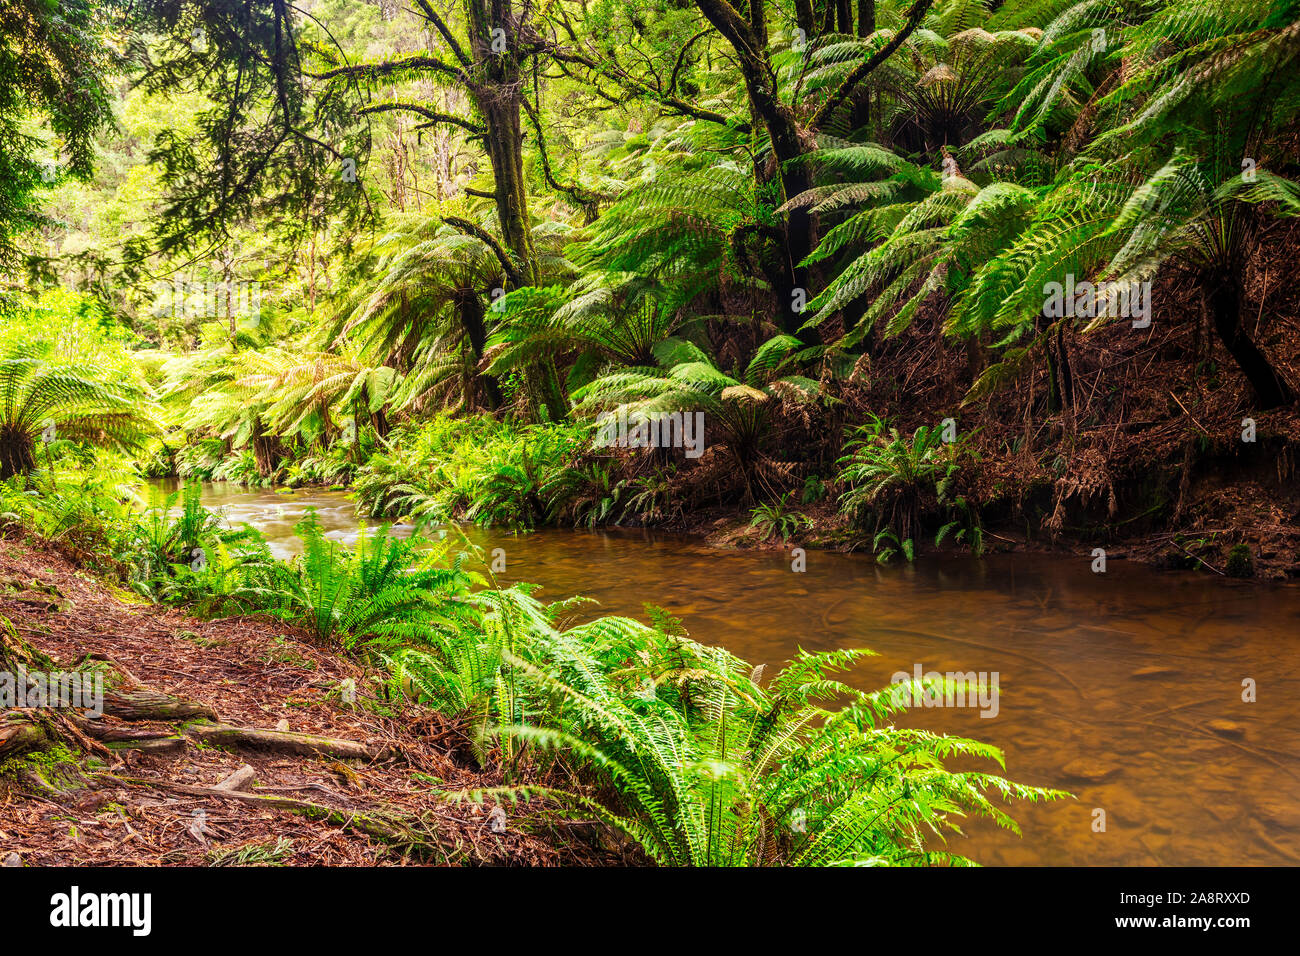 Californian redwood forest in the Great Otway National Park in Victoria, Australia Stock Photo